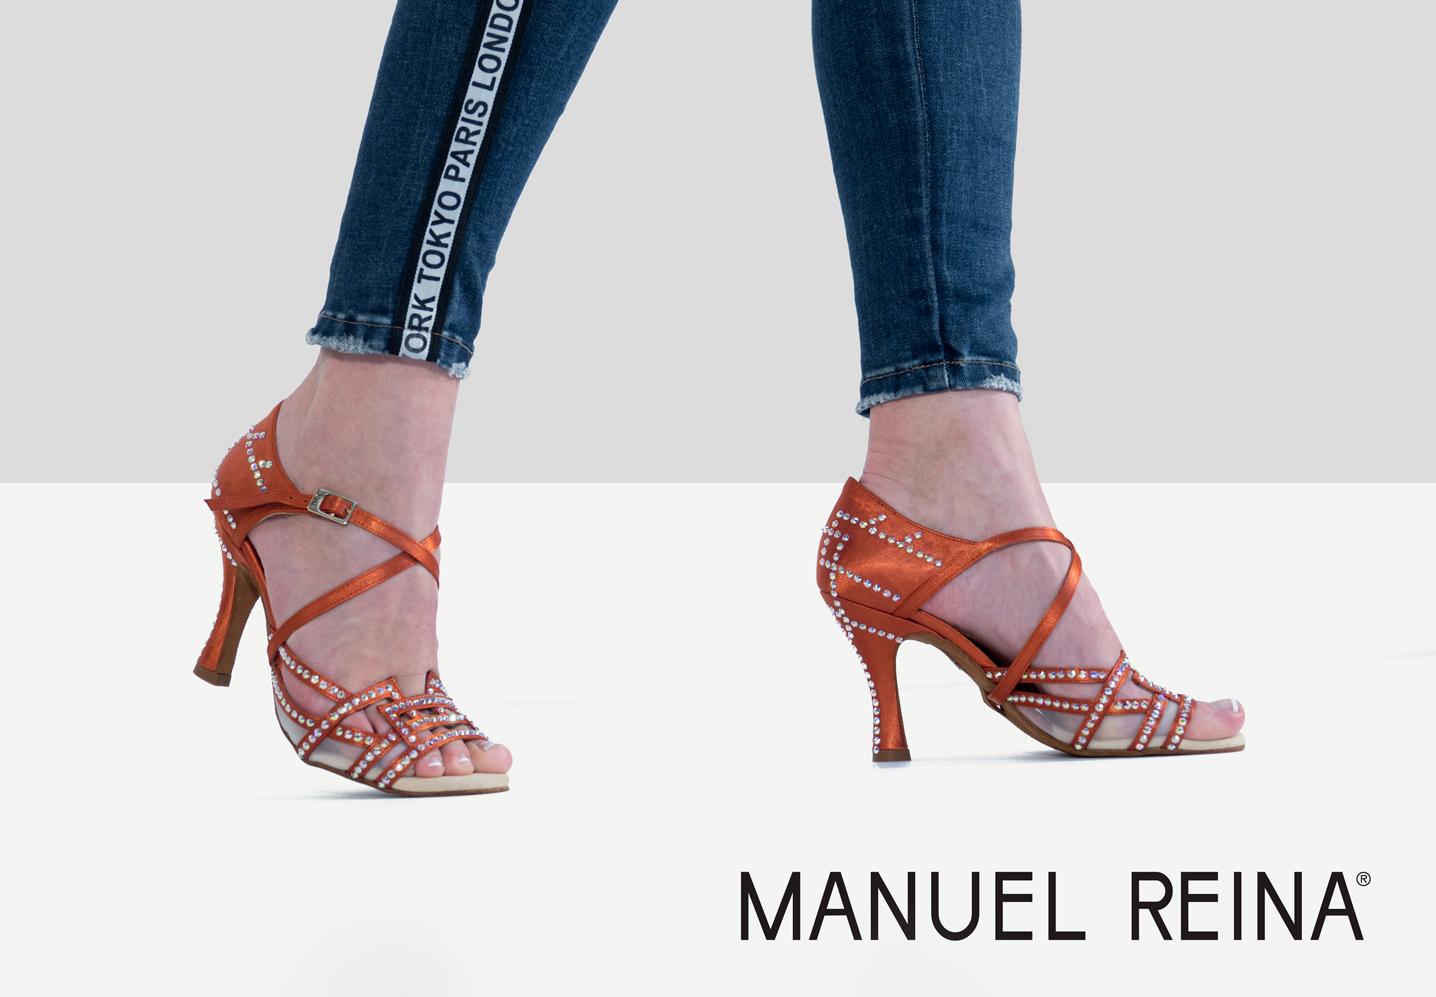 Manuel · Shoes on Twitter: "😍❤️💕When the dance is your 😍 #manuelreina #isabelleetfelicien #musthave #dance #dancers #custom #ilovedance #sandals #fashion #moda #style #salsa #rumba #essentials #mnlrnshs #Kizomba ...